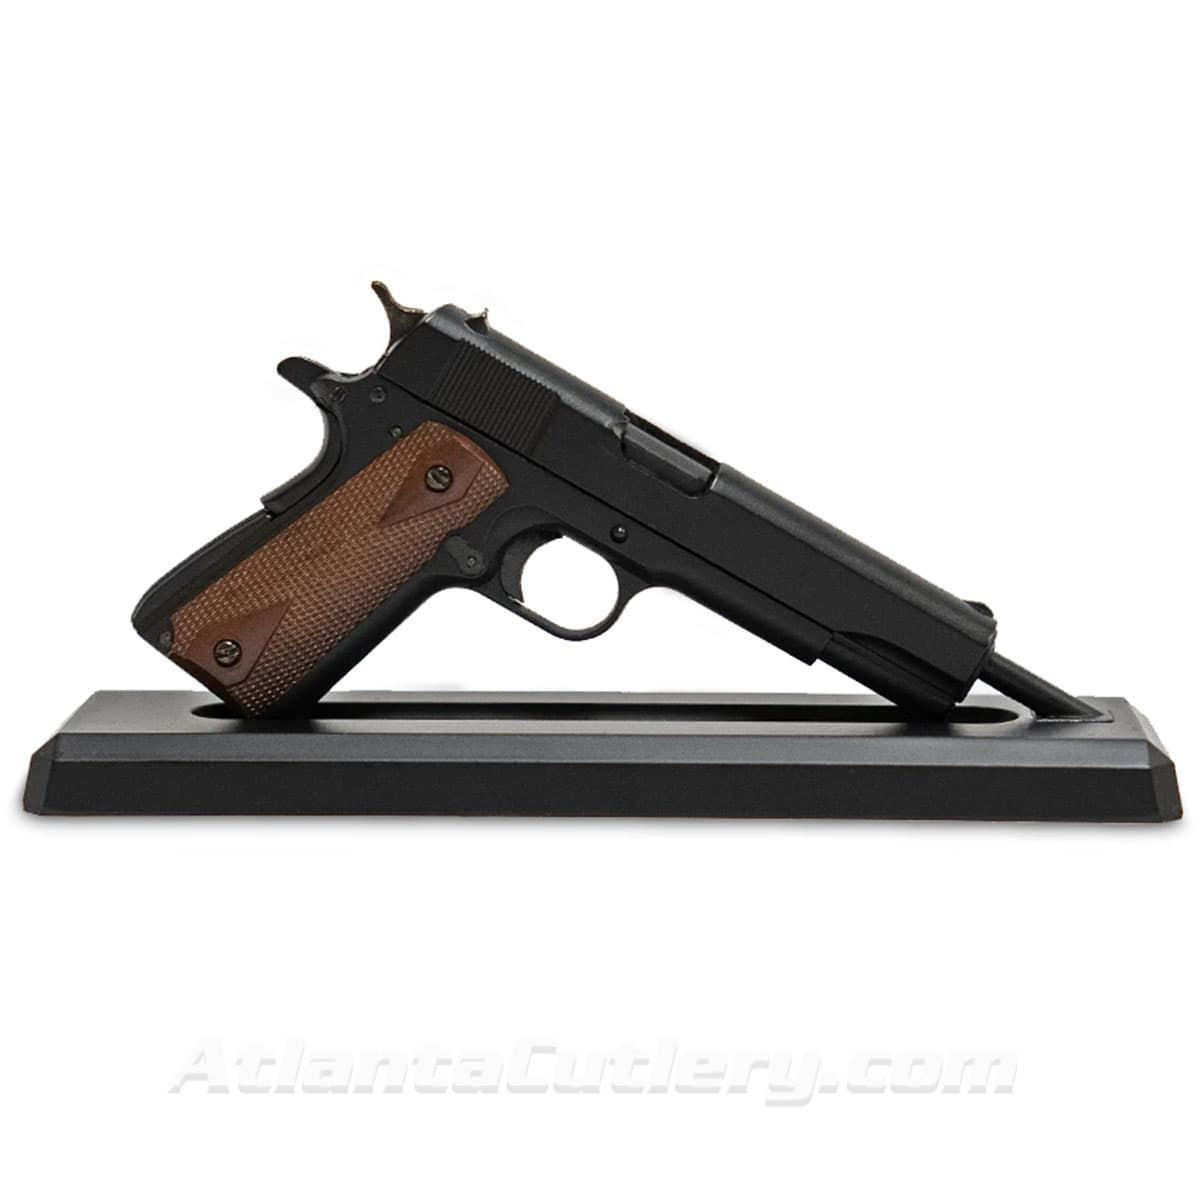 Goatguns Miniature 1911 Toy Gun is a metal 1:2.5 scale die-cast model and many of the parts function, some assembly required